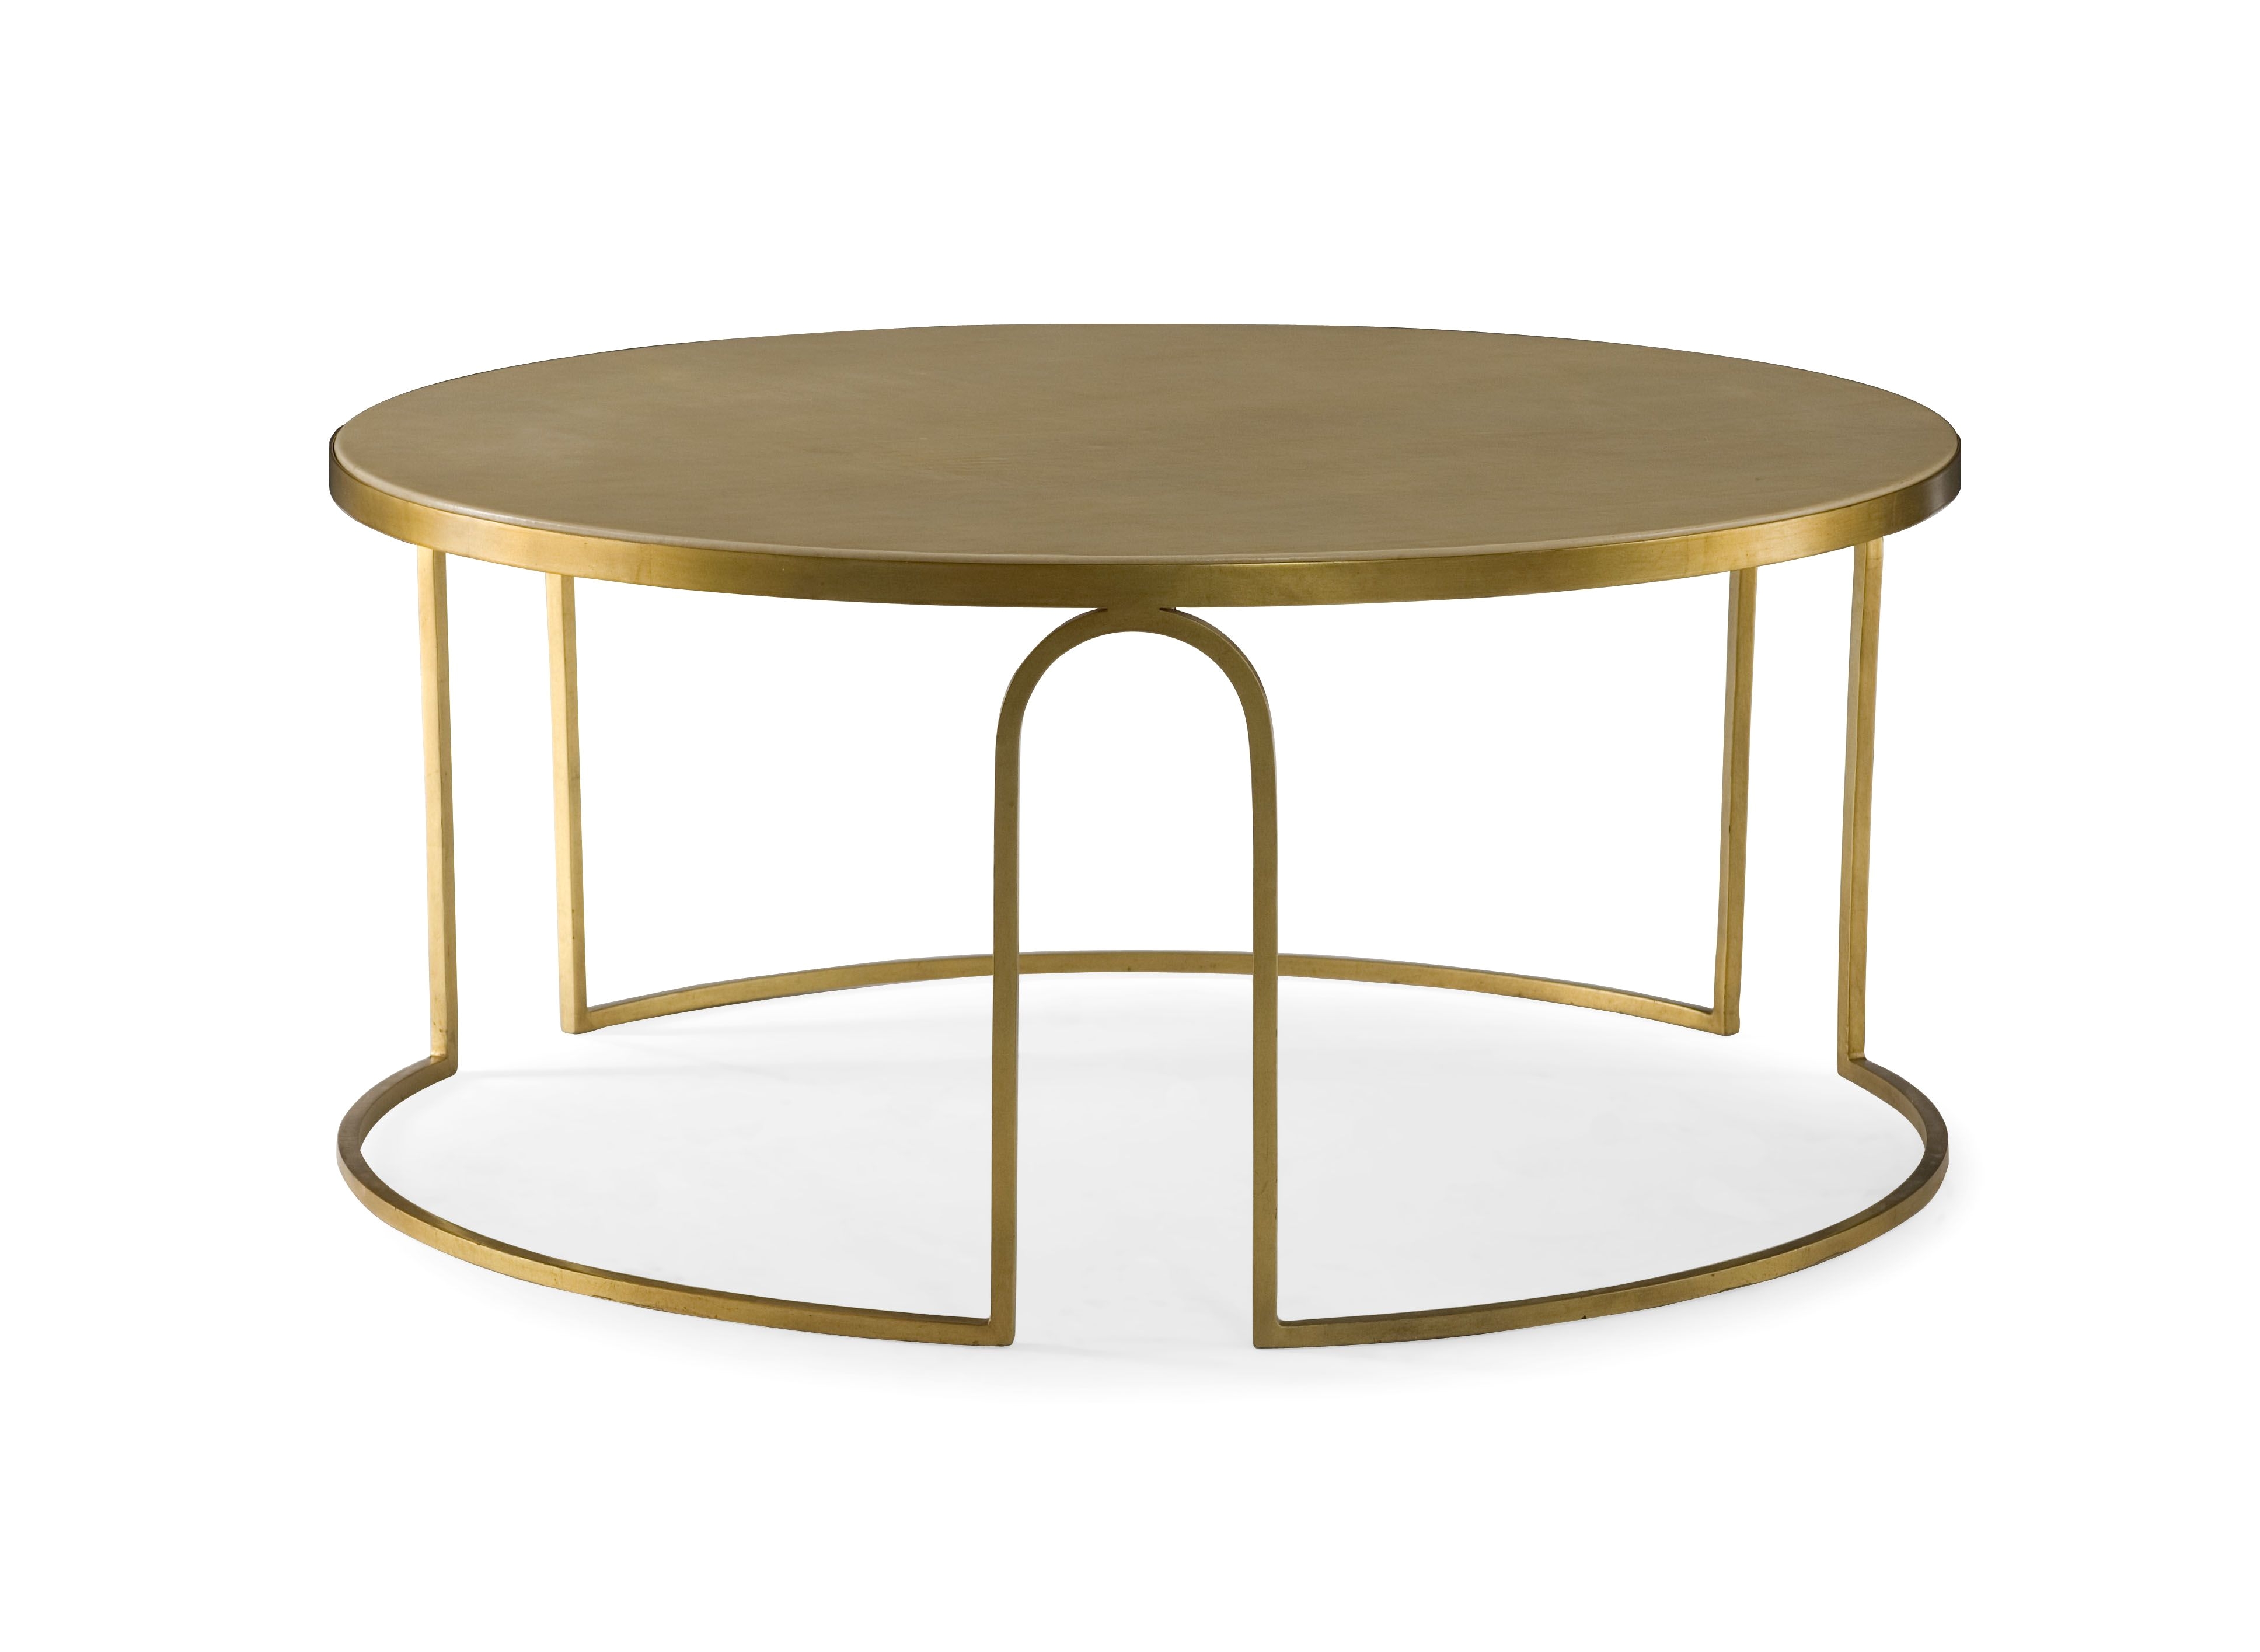 A transitional round coffee table featuring a cream faux vellum top and an art deco inspired gold leaf steel base